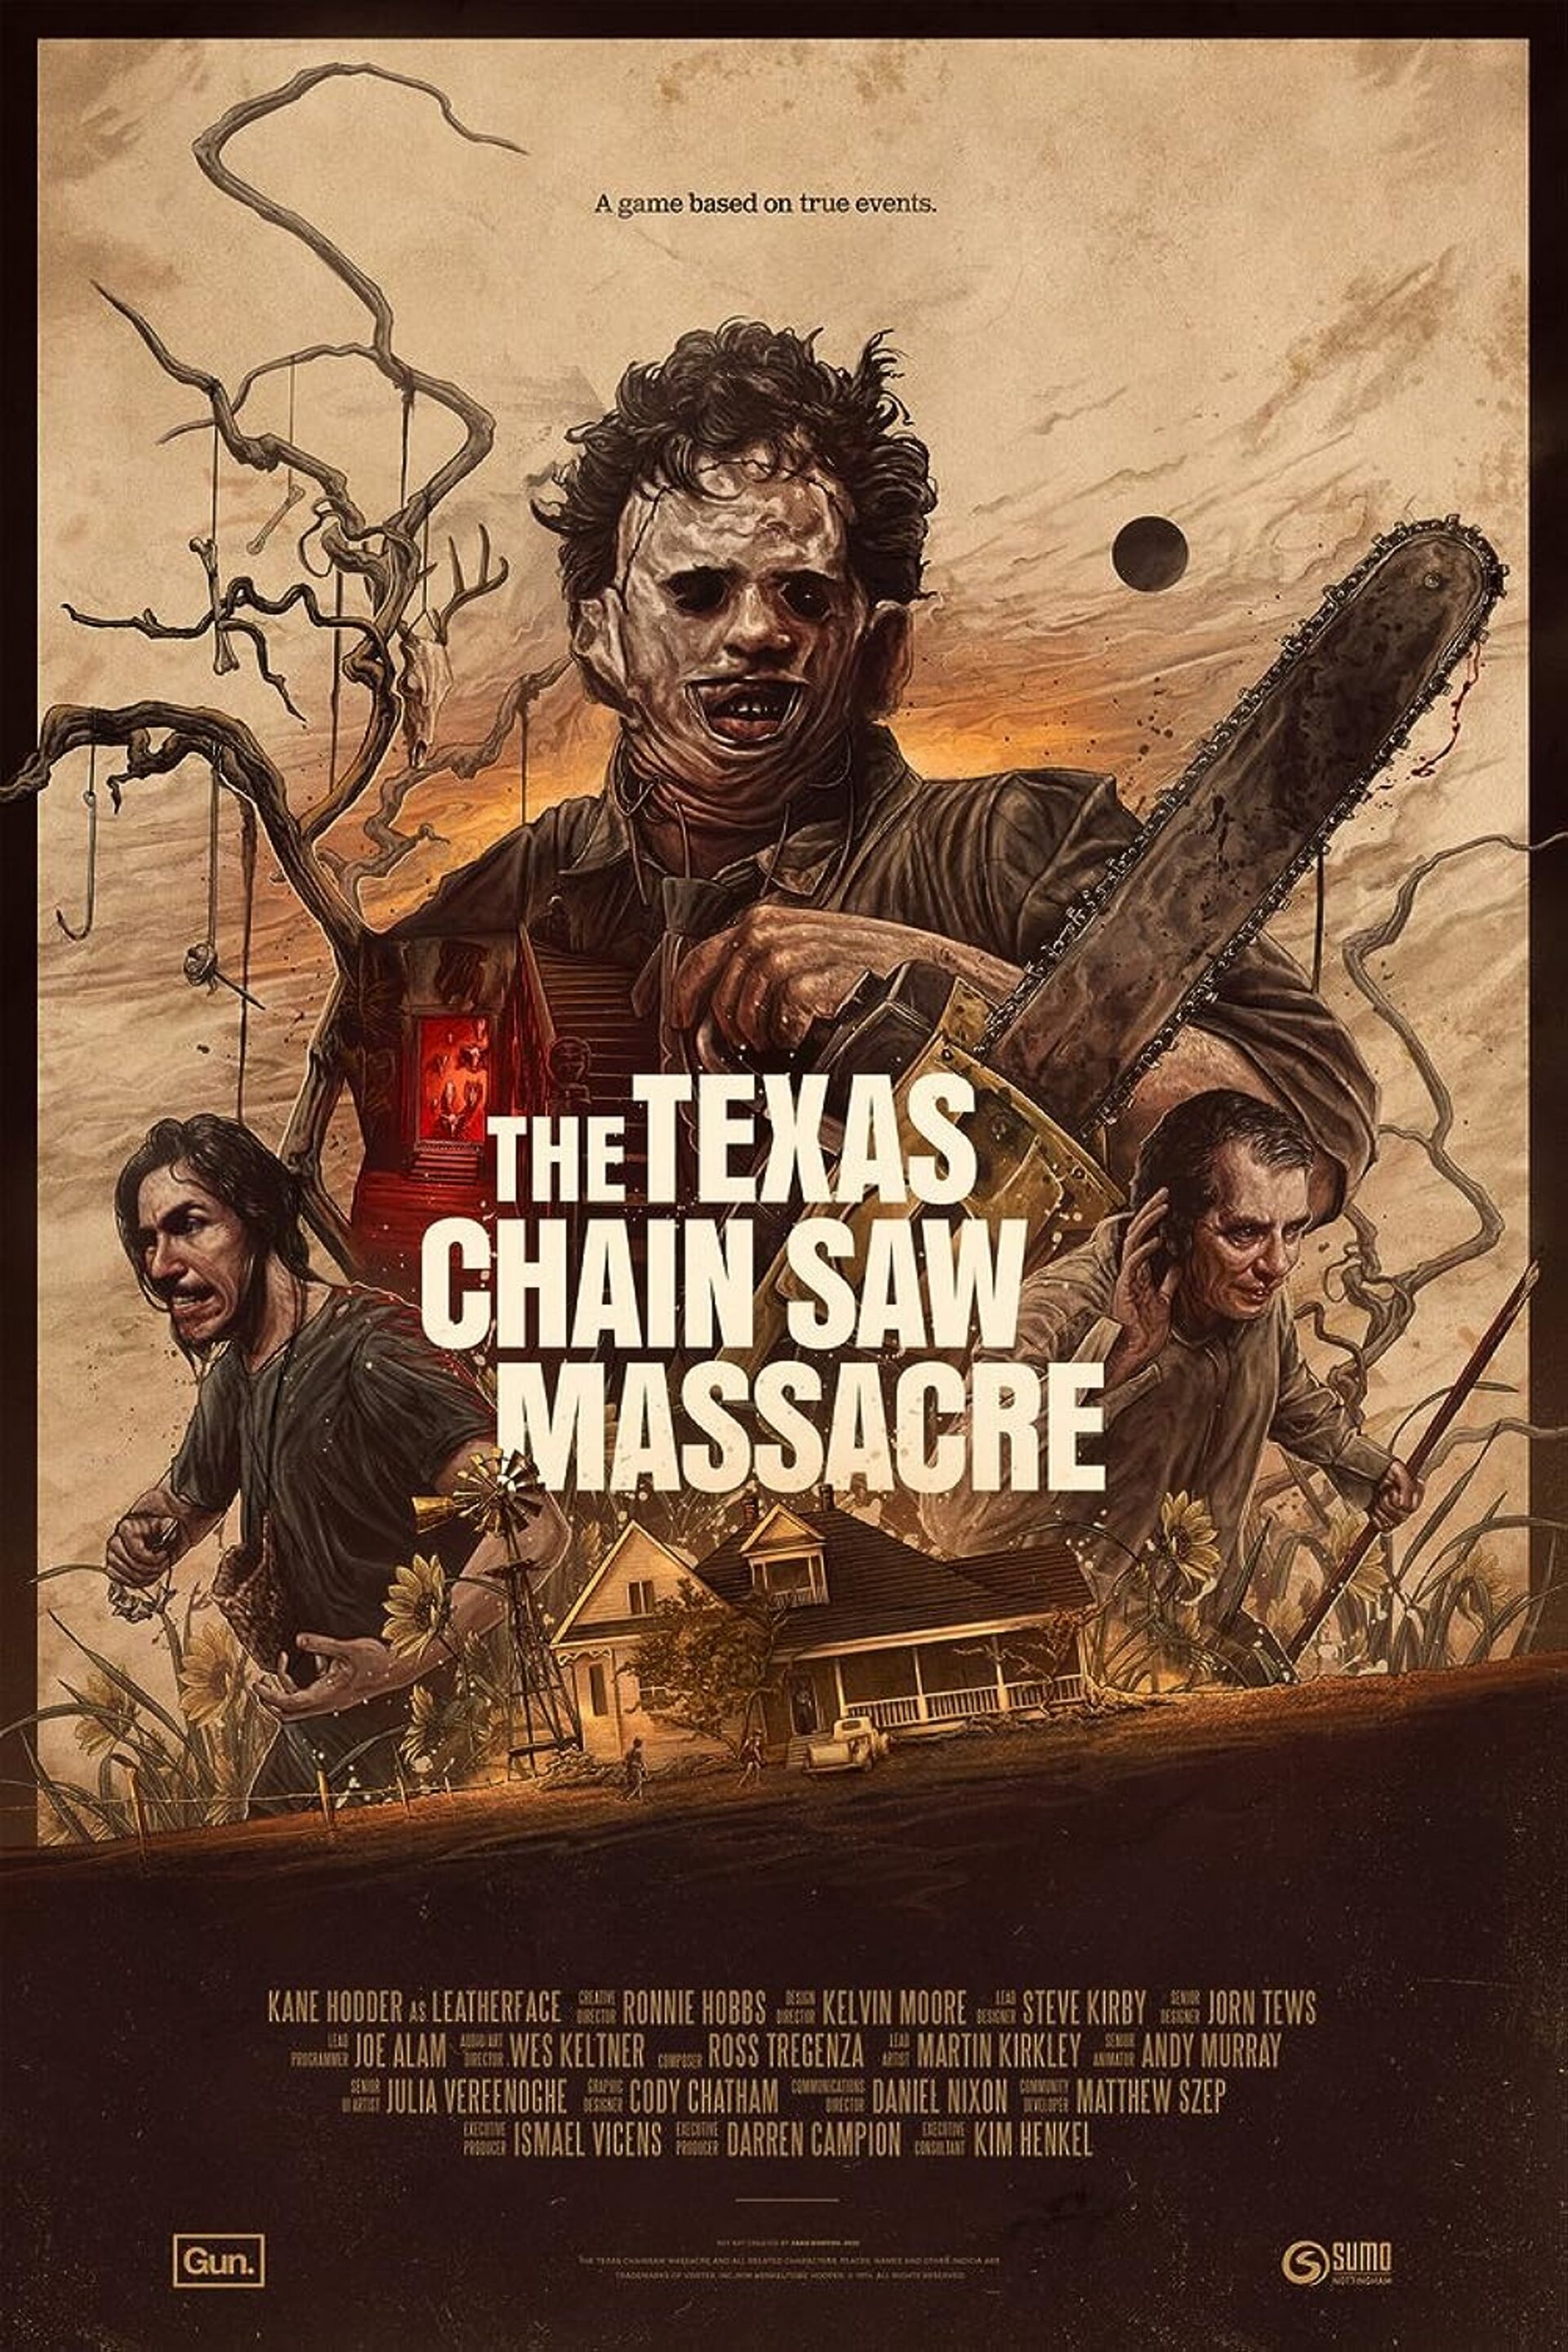 Why The Texas Chain Saw Massacre Game is a Must-Play for Horror Fans